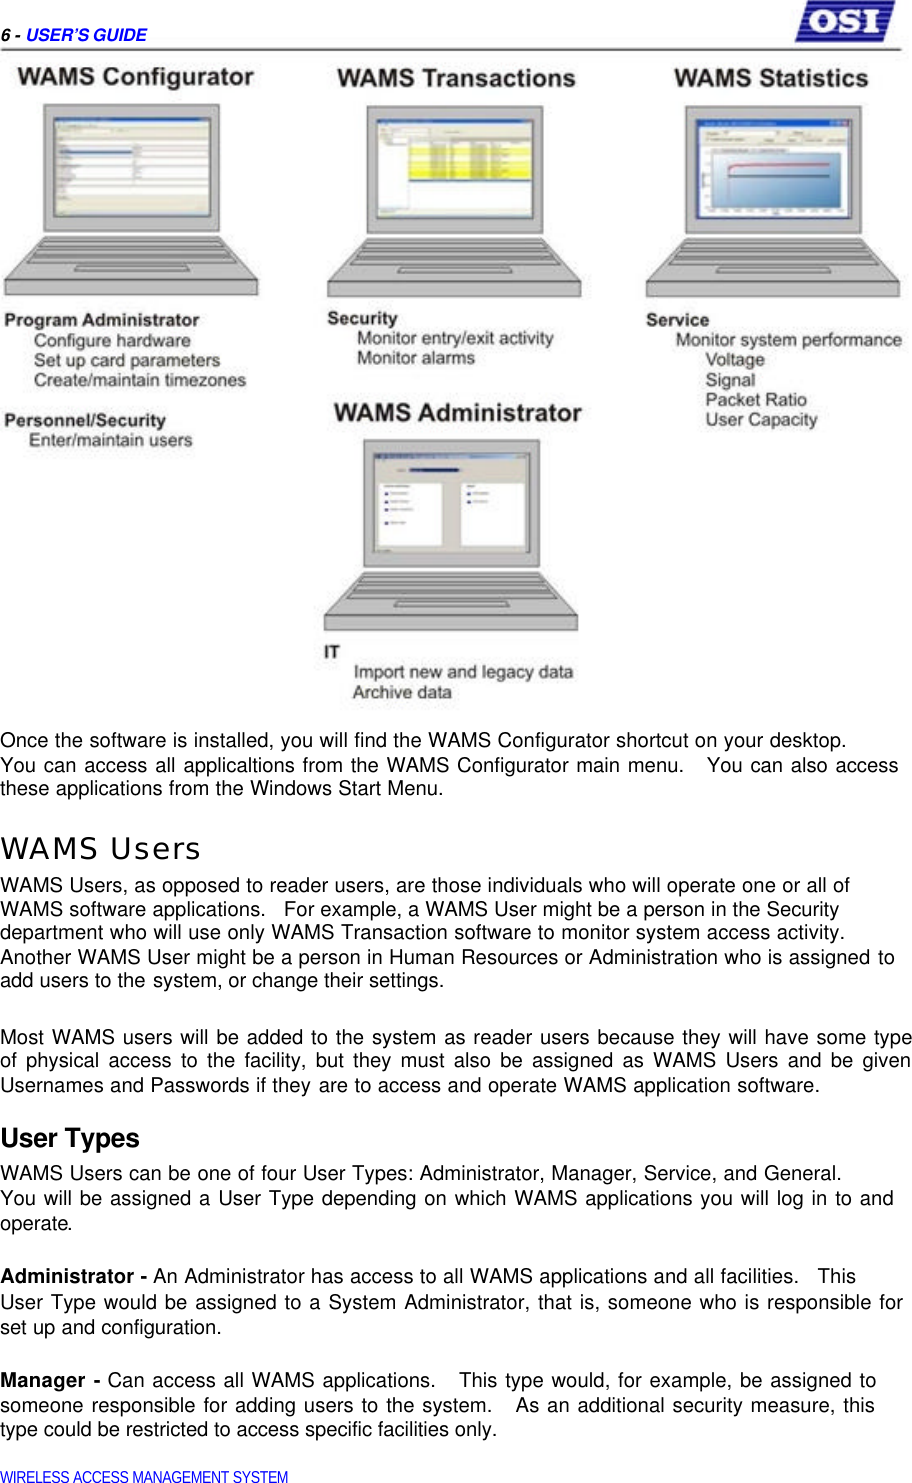     6 - USER’S GUIDE                              Once the software is installed, you will find the WAMS Configurator shortcut on your desktop.  You can access all applicaltions from the WAMS Configurator main menu.   You can also access these applications from the Windows Start Menu.  WAMS Users  WAMS Users, as opposed to reader users, are those individuals who will operate one or all of WAMS software applications.   For example, a WAMS User might be a person in the Security department who will use only WAMS Transaction software to monitor system access activity. Another WAMS User might be a person in Human Resources or Administration who is assigned to add users to the system, or change their settings.   Most WAMS users will be added to the system as reader users because they will have some type  of physical access to the facility, but they must also be assigned as WAMS Users and be given  Usernames and Passwords if they are to access and operate WAMS application software.  User Types  WAMS Users can be one of four User Types: Administrator, Manager, Service, and General.  You will be assigned a User Type depending on which WAMS applications you will log in to and operate.   Administrator - An Administrator has access to all WAMS applications and all facilities.   This  User Type would be assigned to a System Administrator, that is, someone who is responsible for set up and configuration.   Manager - Can access all WAMS applications.   This type would, for example, be assigned to someone responsible for adding users to the system.   As an additional security measure, this type could be restricted to access specific facilities only.   WIRELESS ACCESS MANAGEMENT SYSTEM  